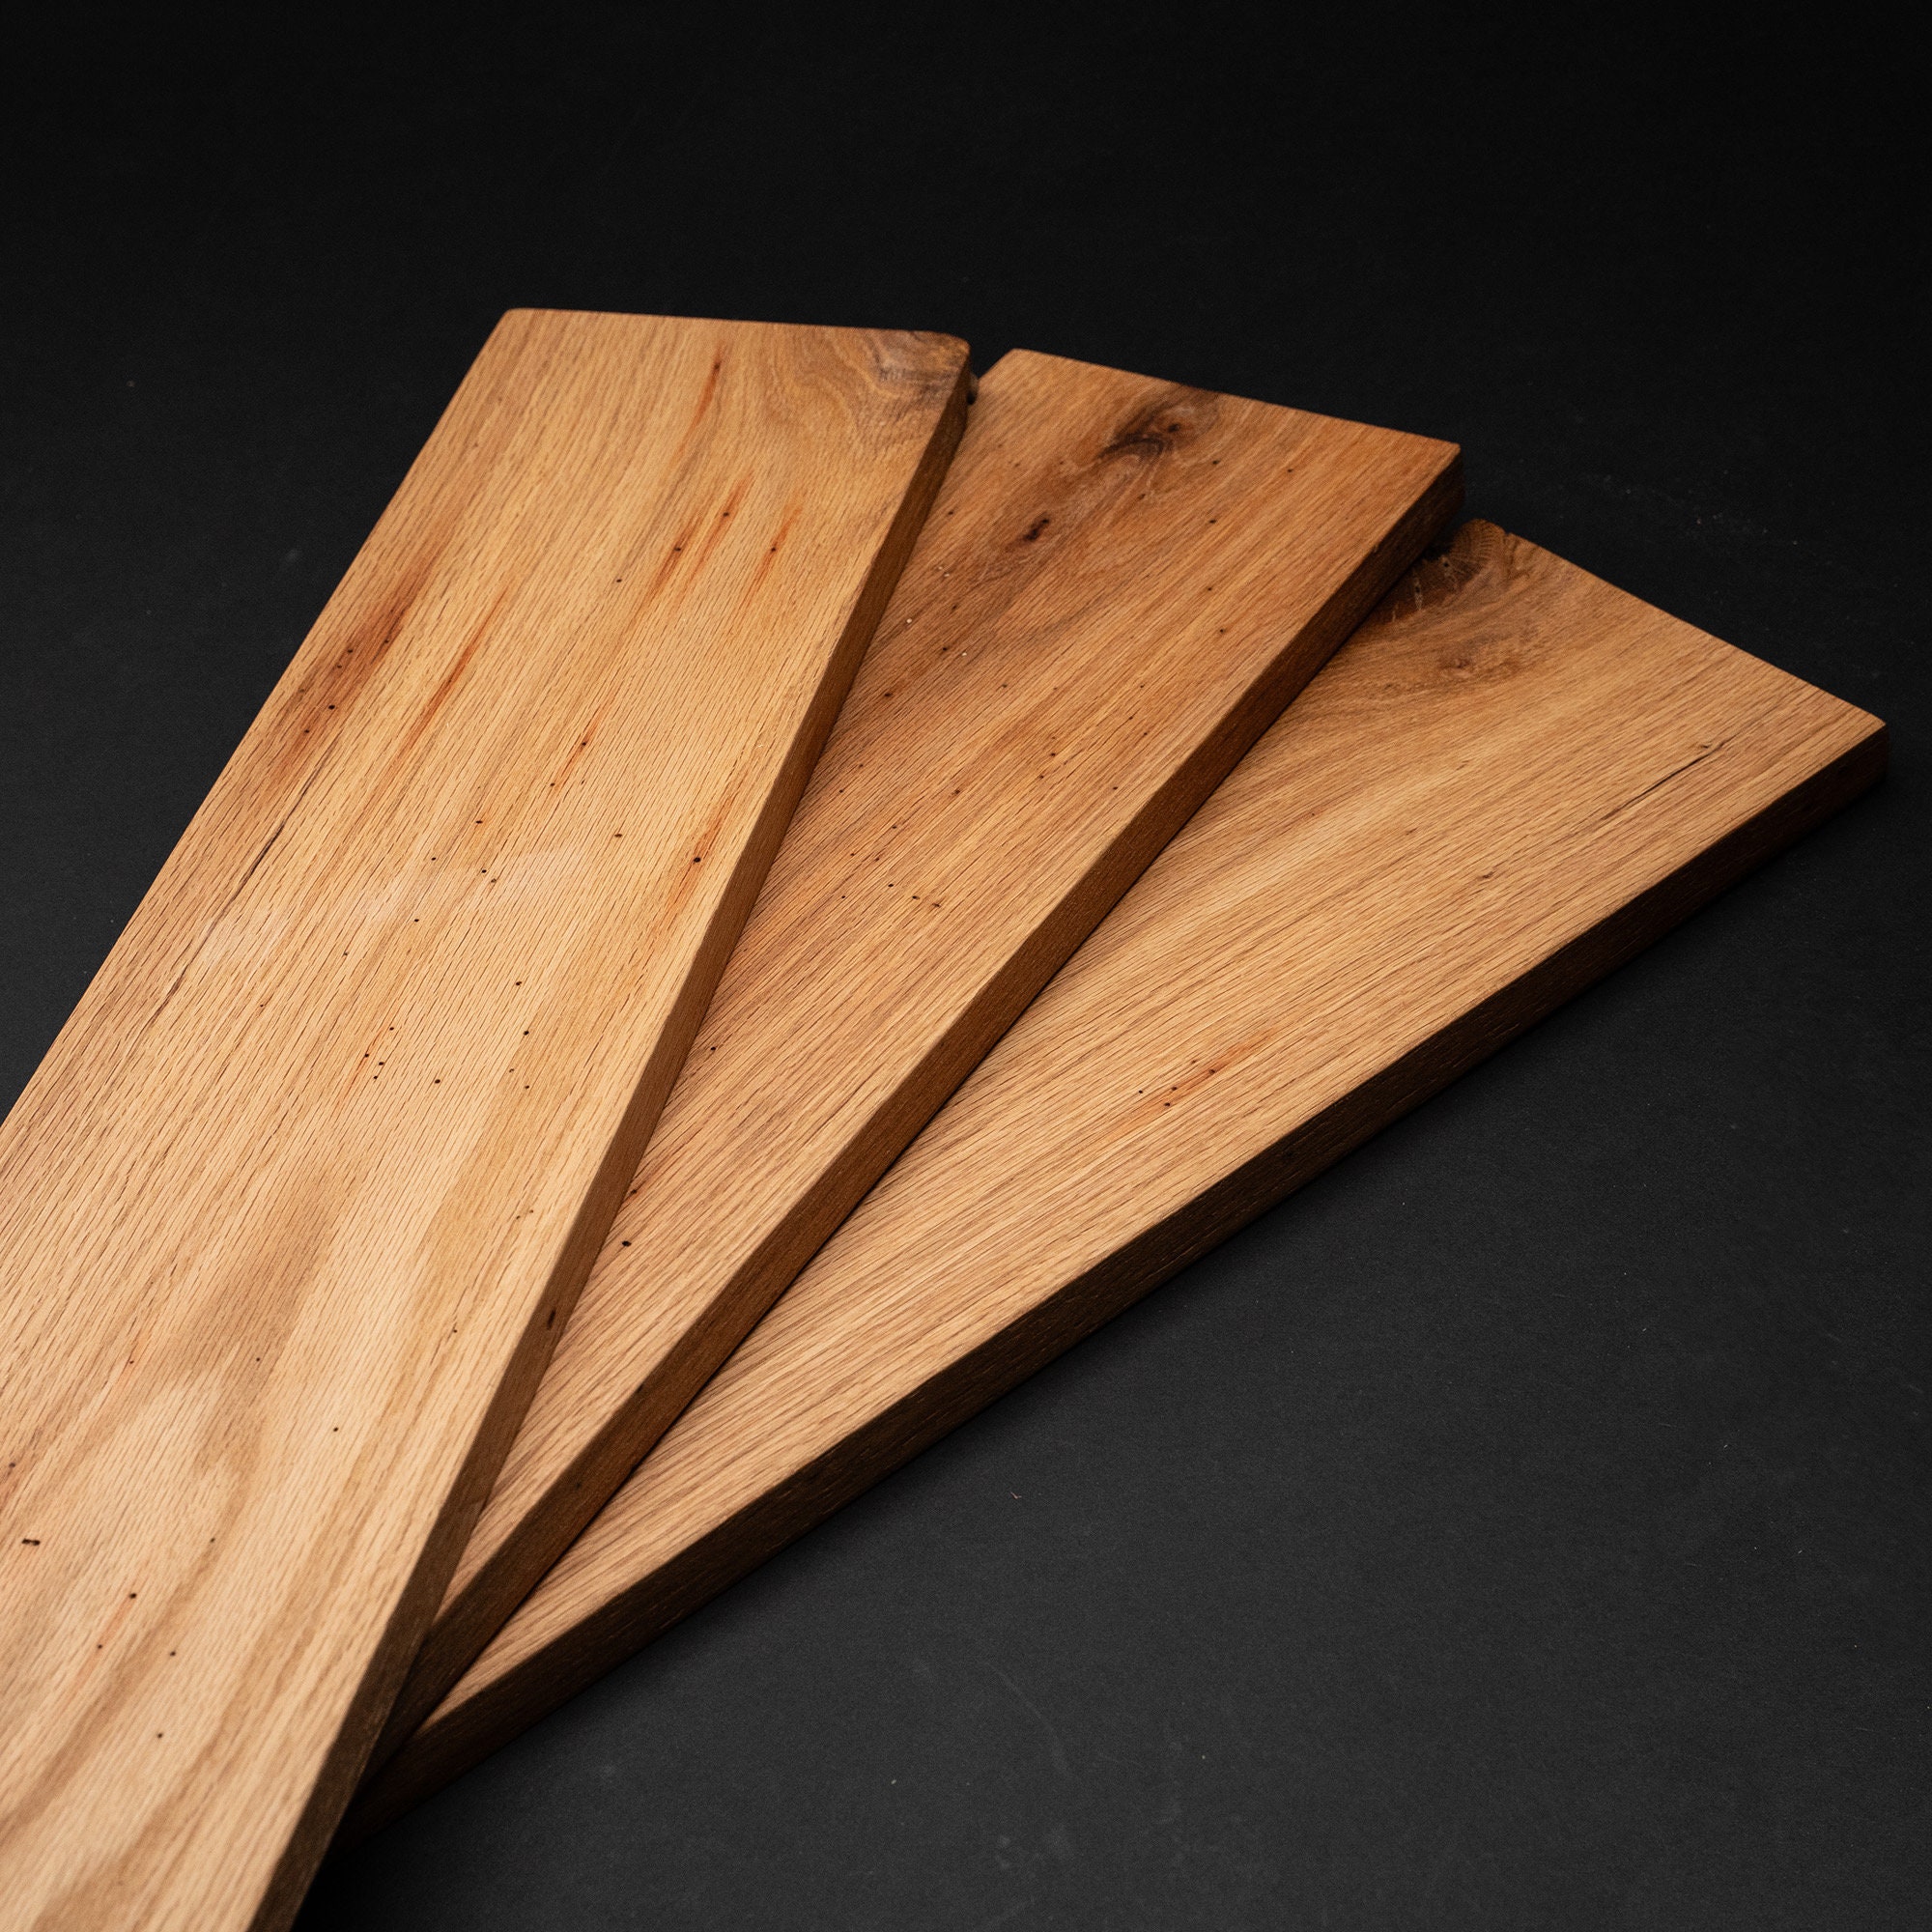 24 Thin Wood Variety Box about 1/8 5/8 Thick X Varying Widths and